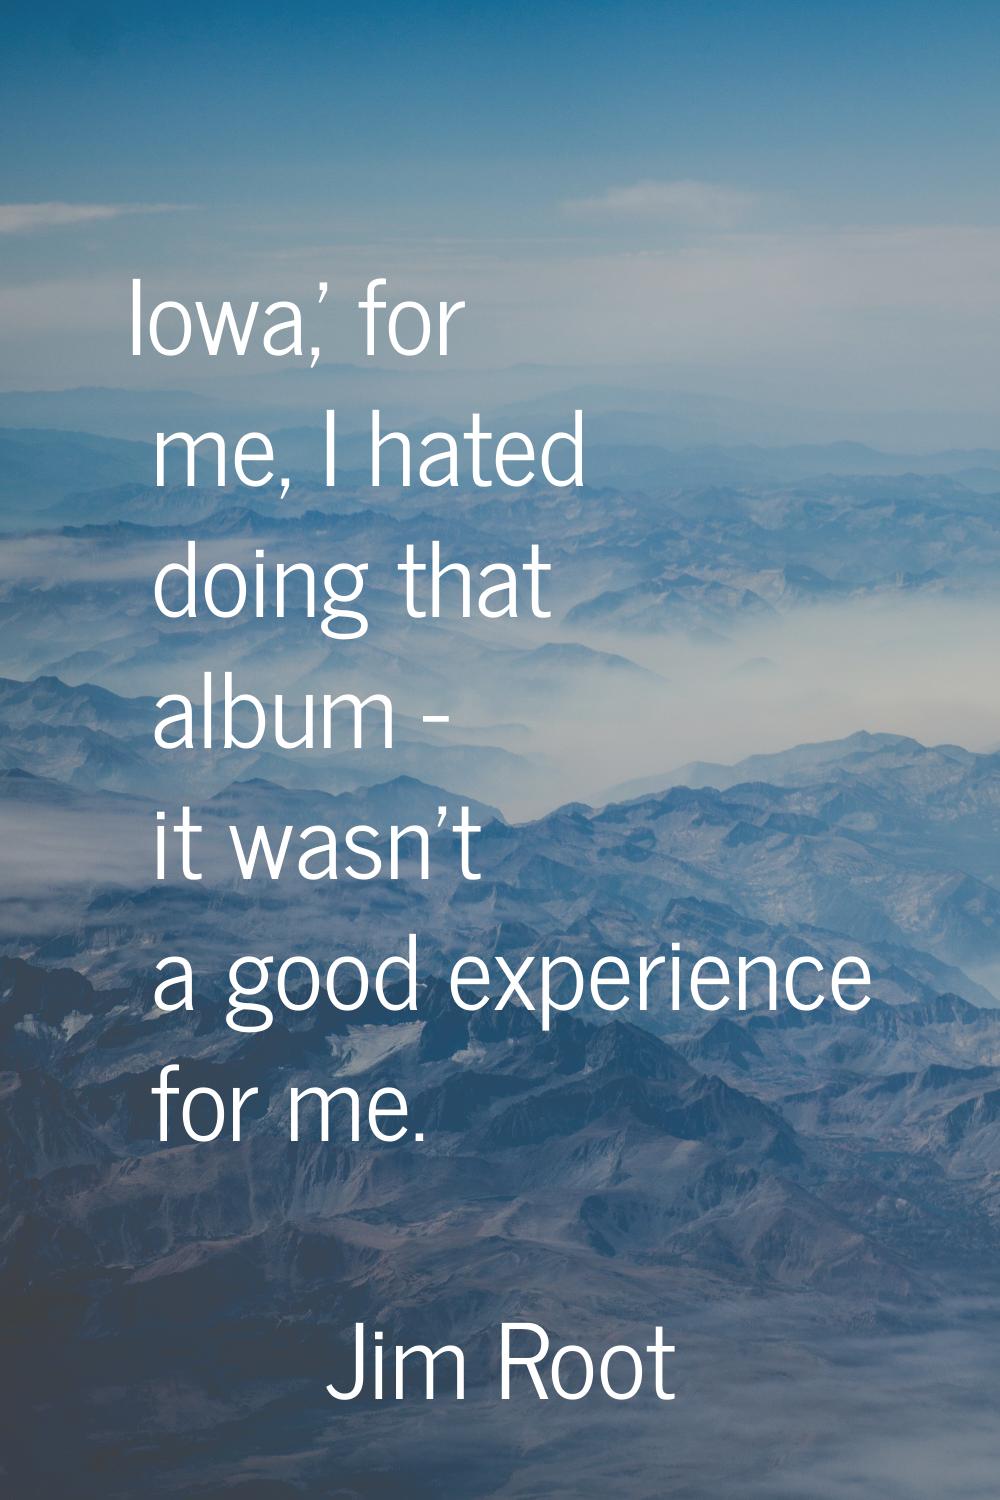 Iowa,' for me, I hated doing that album - it wasn't a good experience for me.